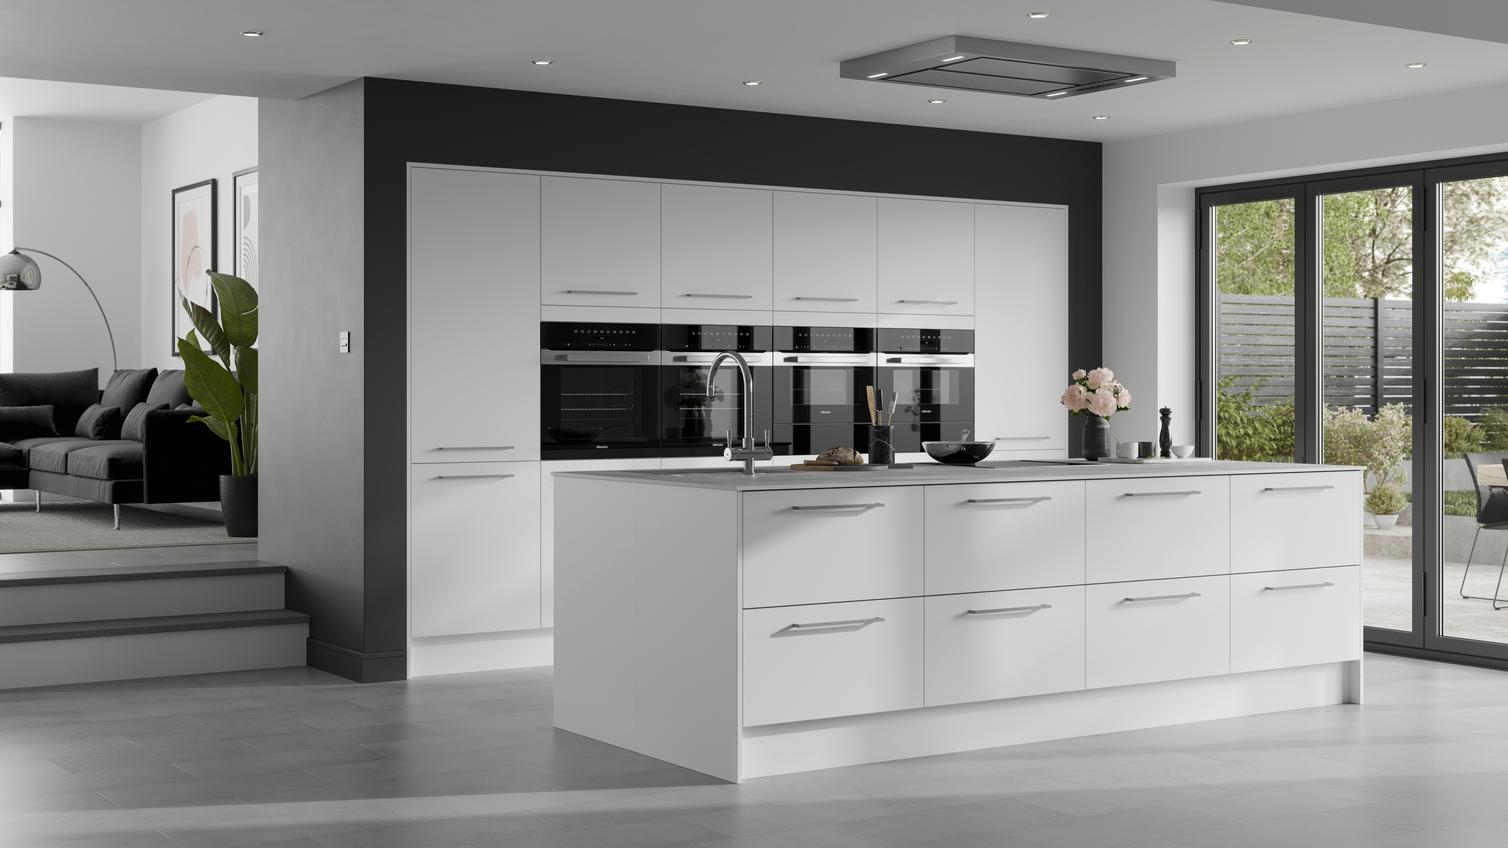 A white slab kitchen with matt finish and island layout. A monochrome design using black worktops, floors, and appliances.